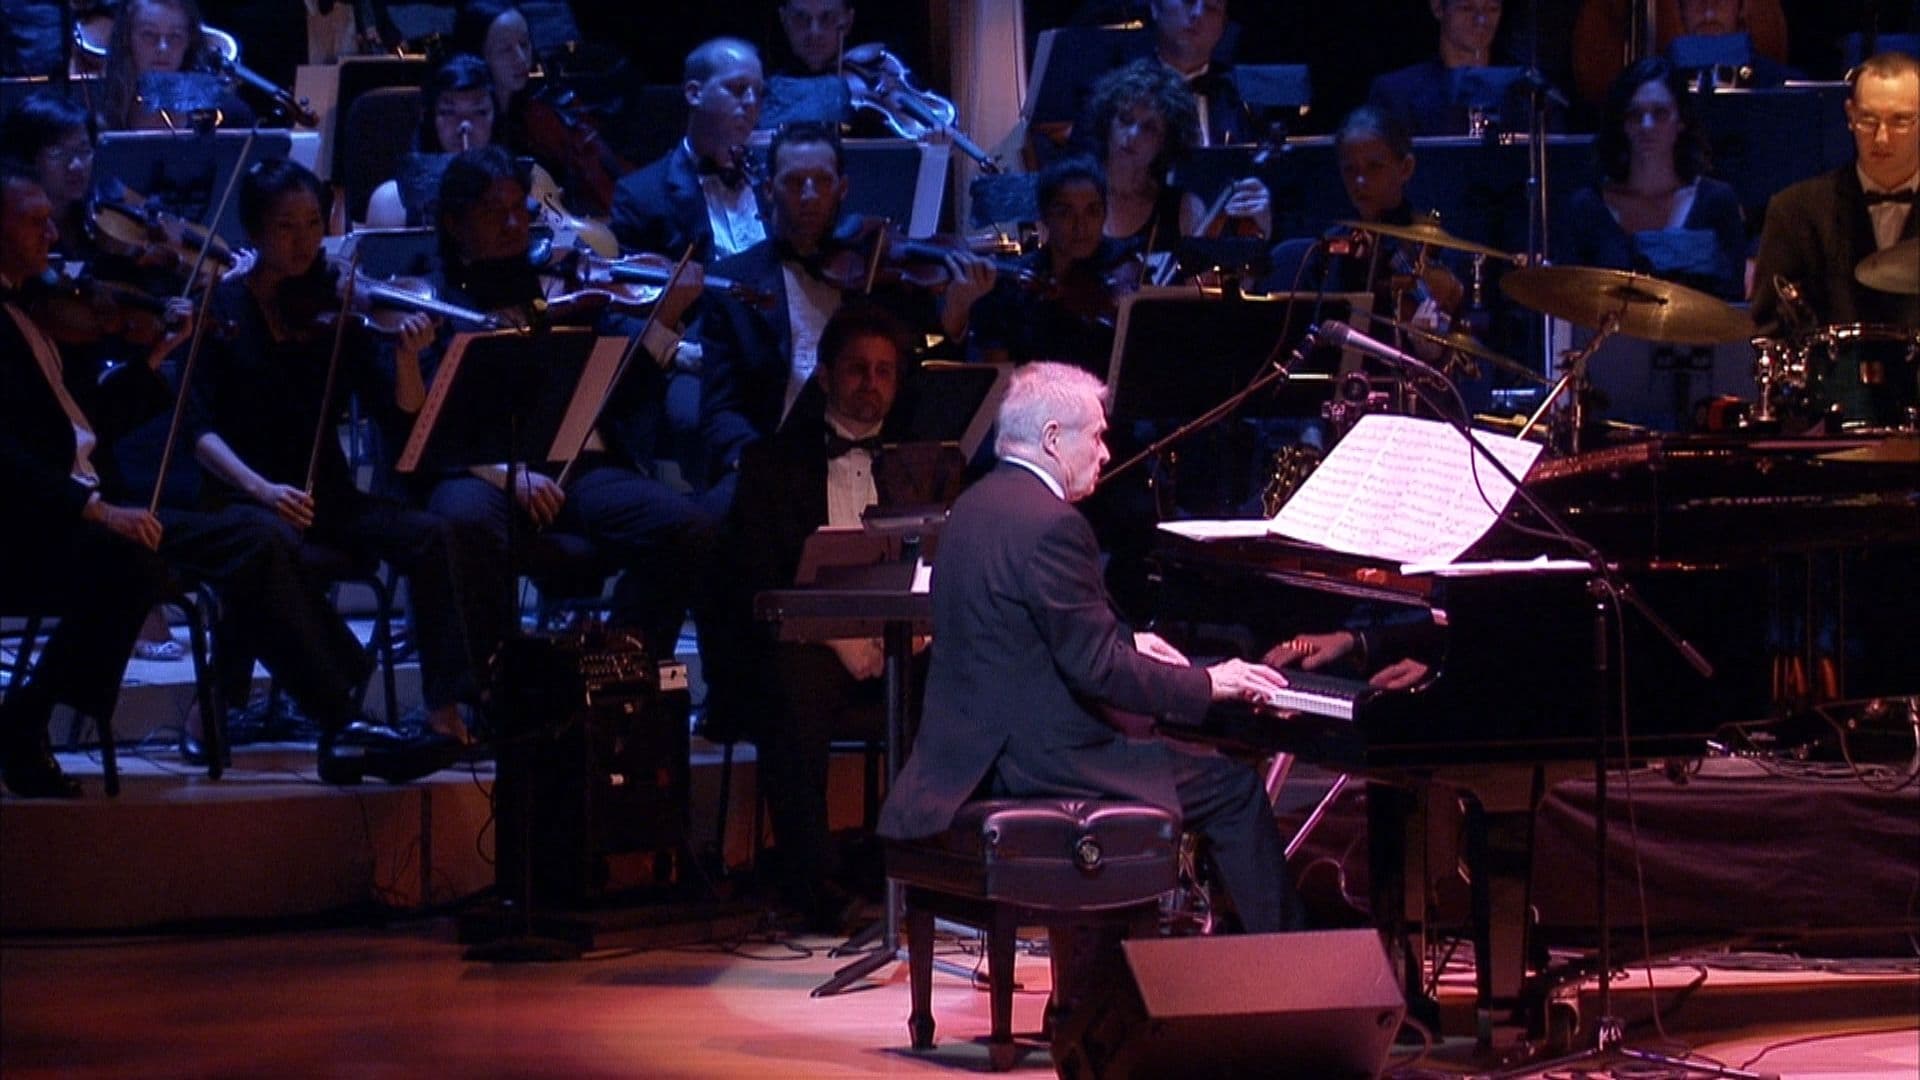 An Evening With Dave Grusin (2011)